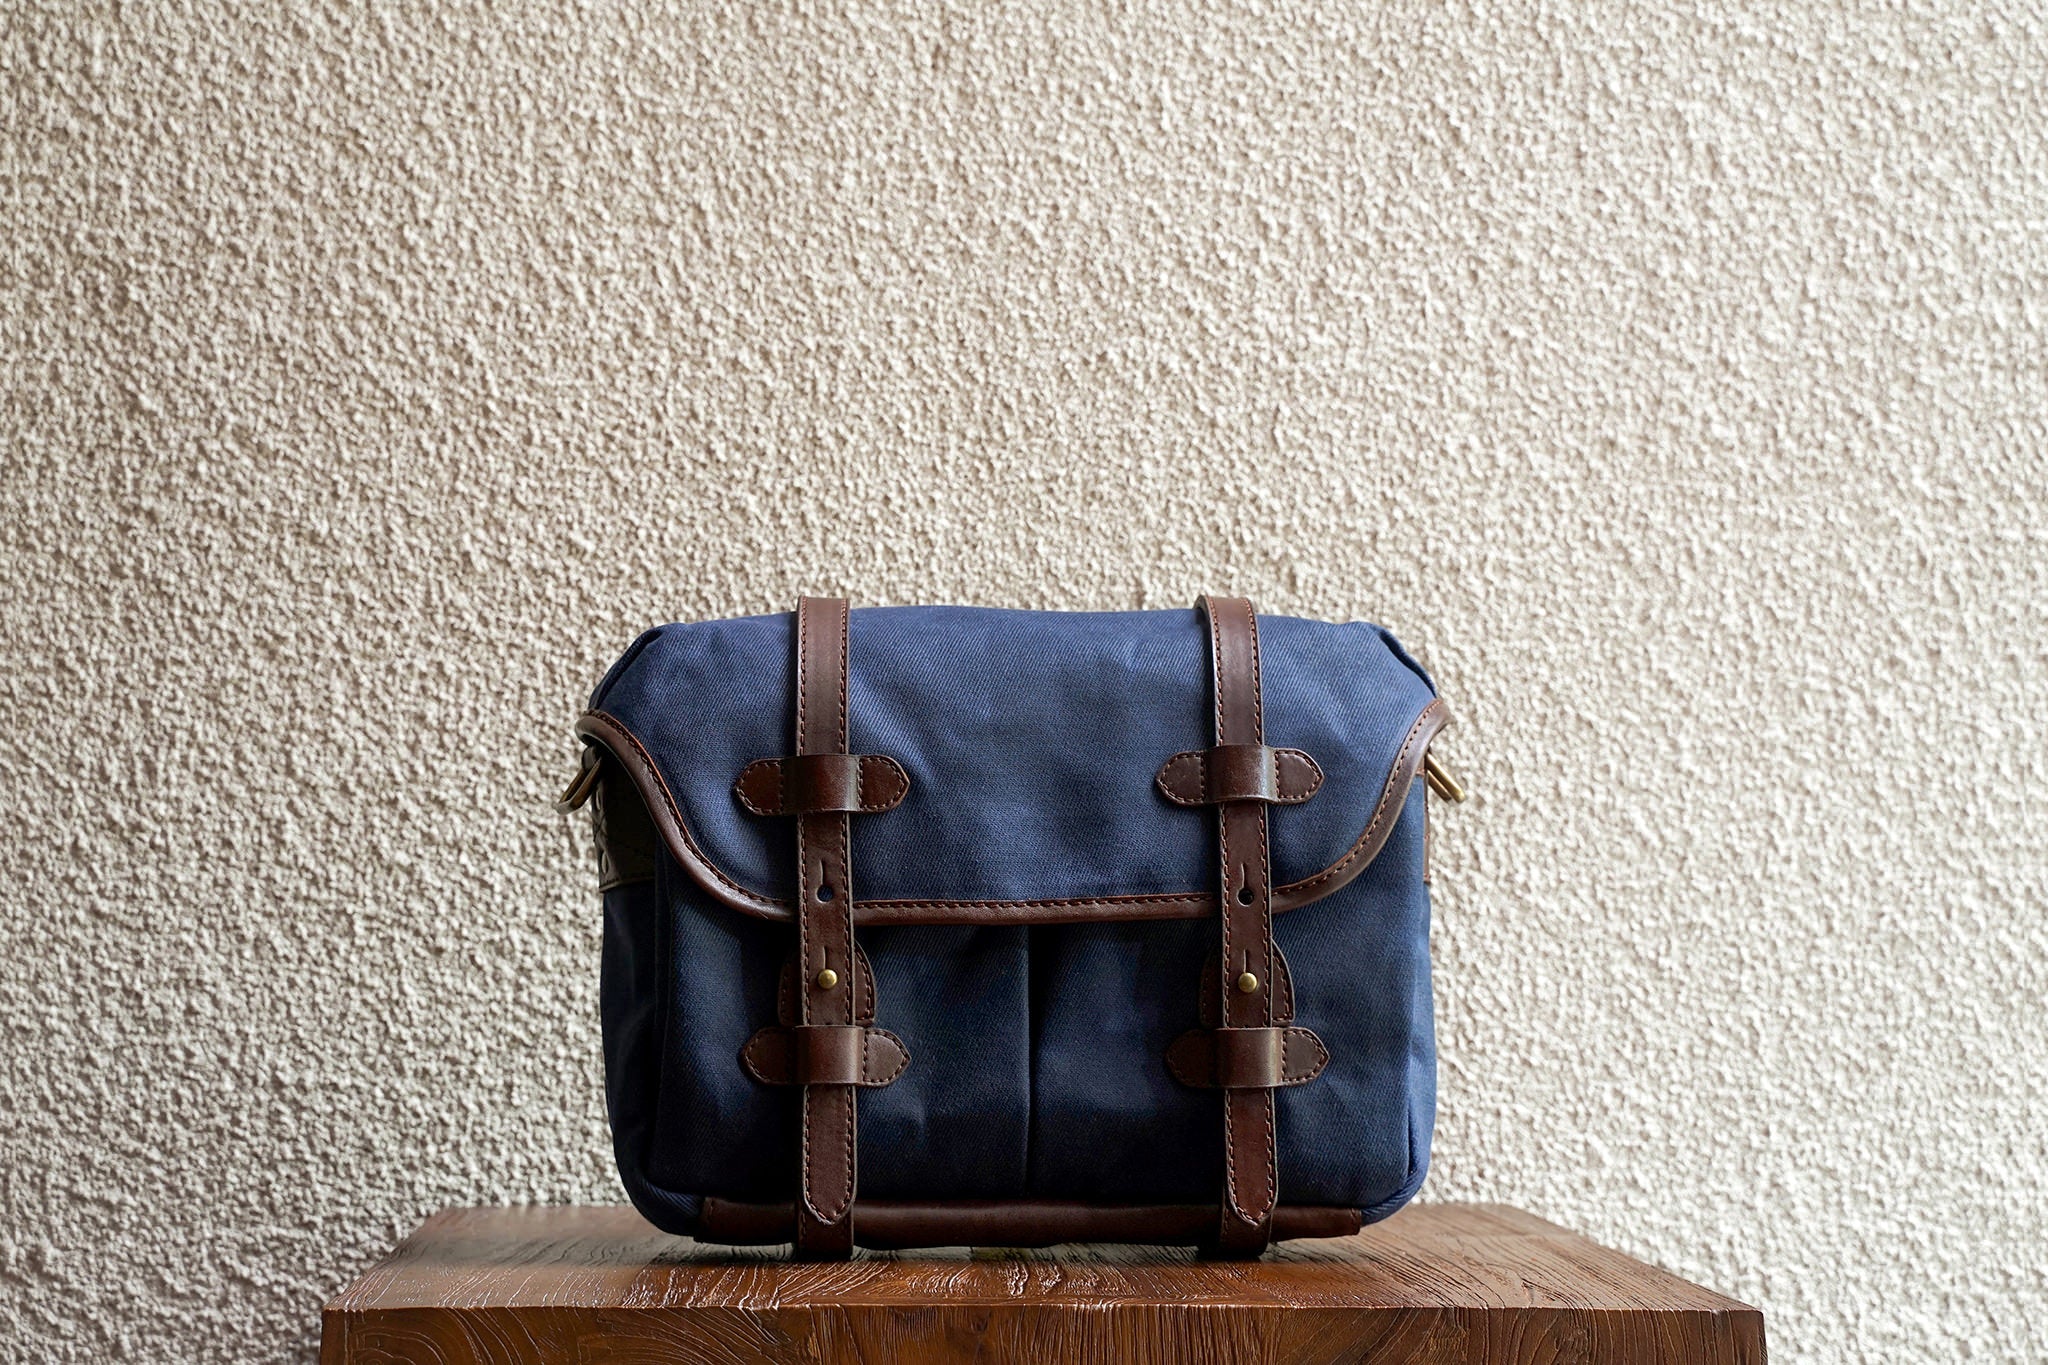 Our bags are made from as few material pieces as possible. Fewer seams makes for a stronger bag.